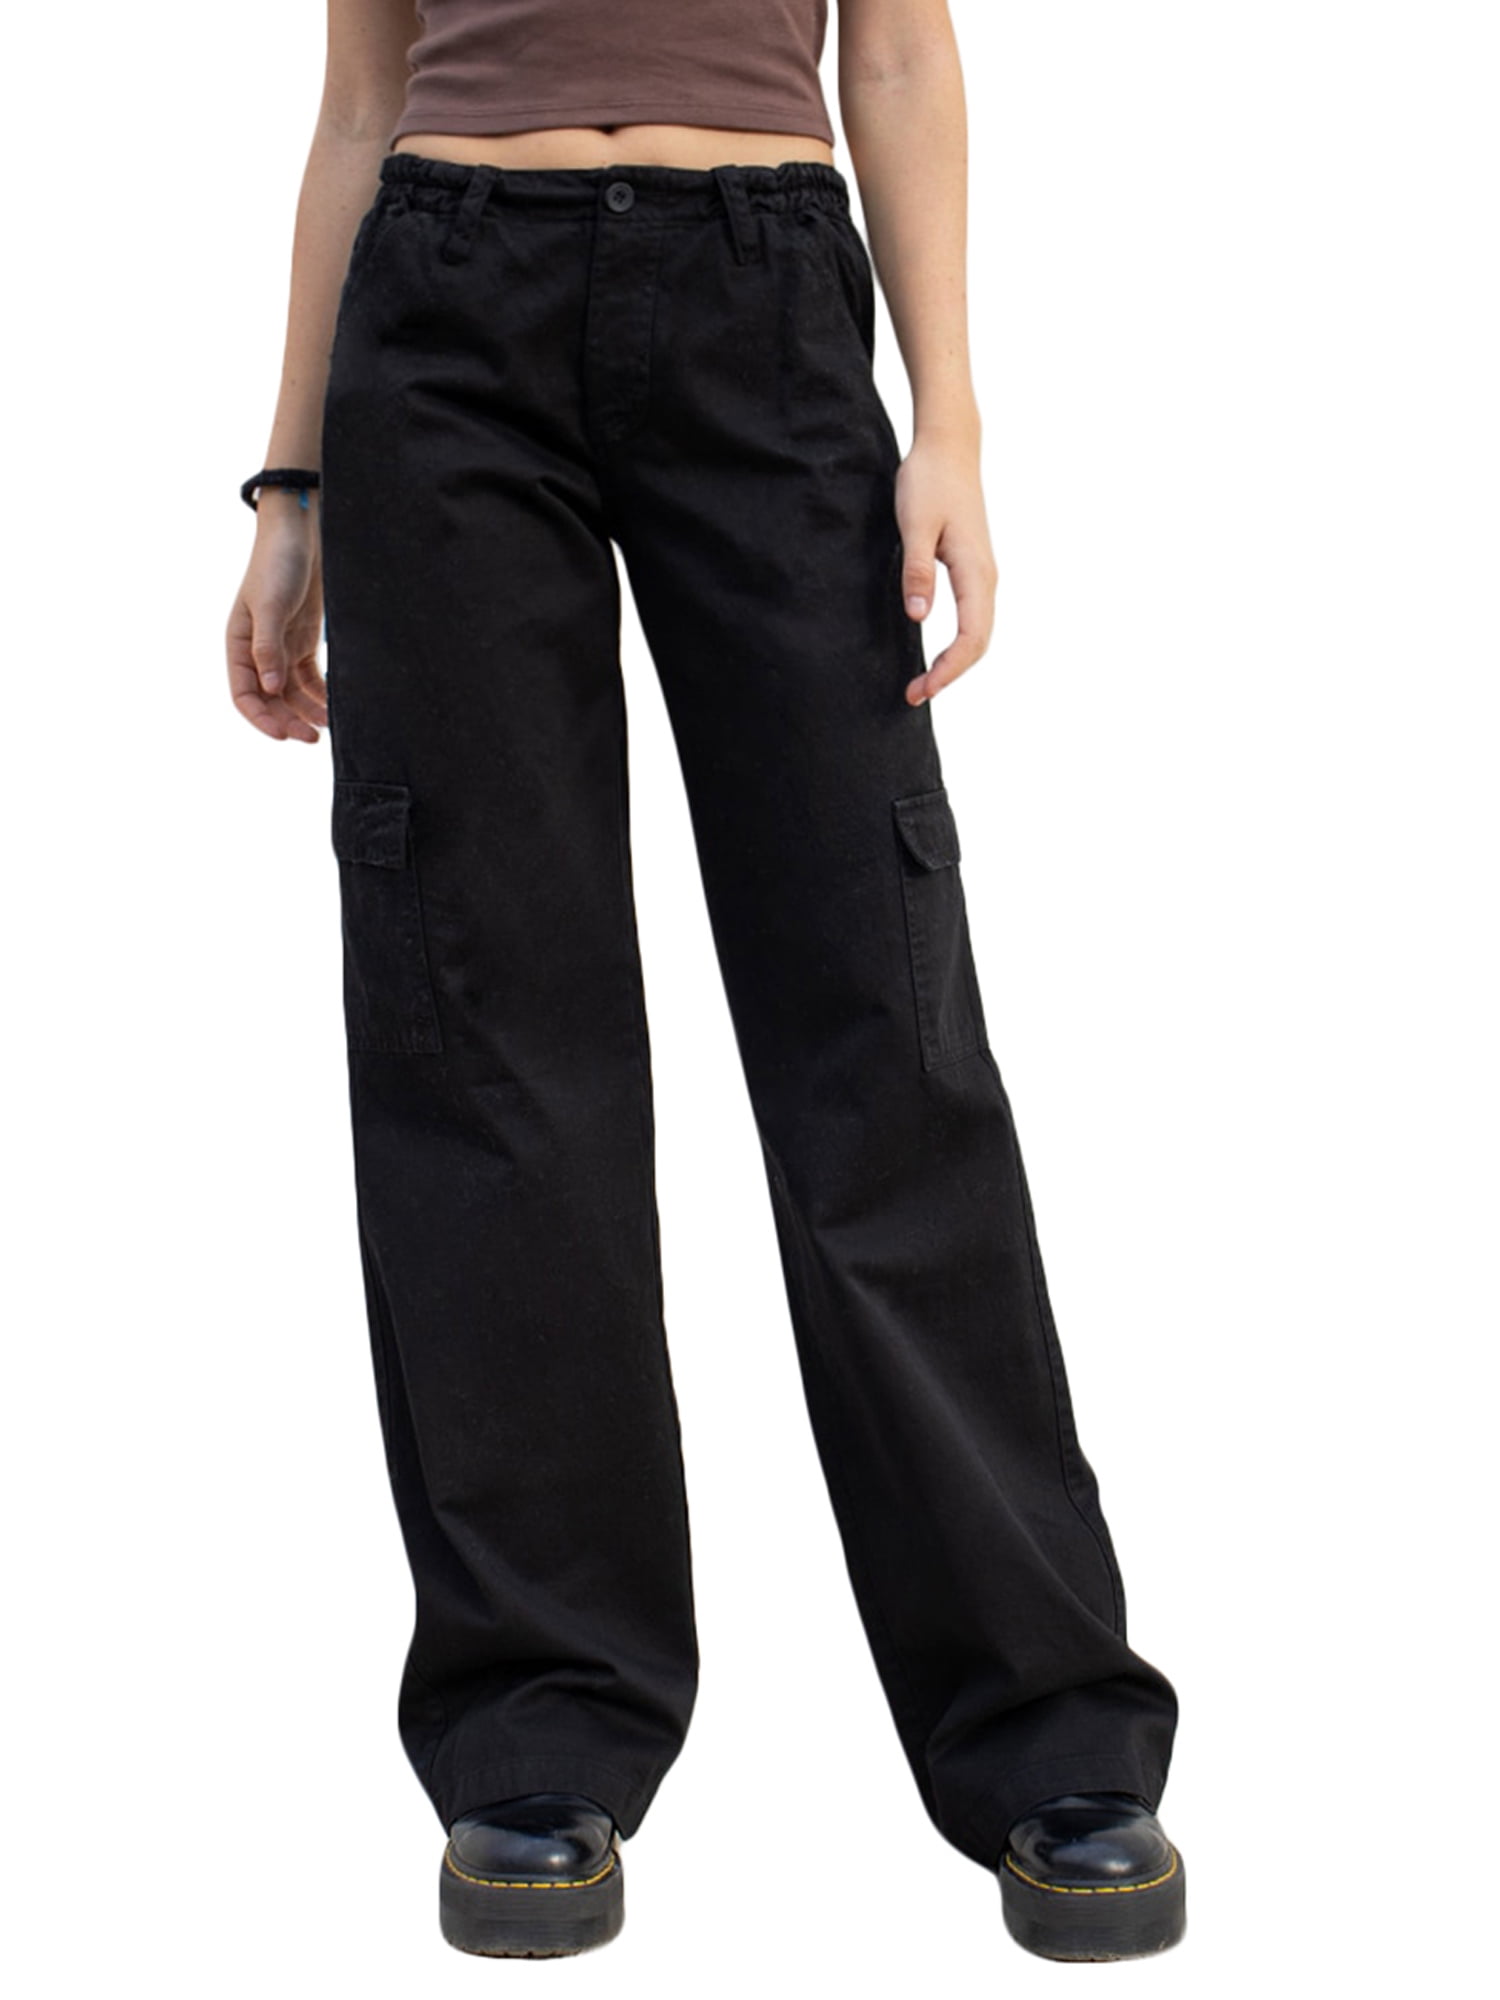 Genuiskids Women's Solid Cargo Long Pants Casual Relaxed Fit Straight ...